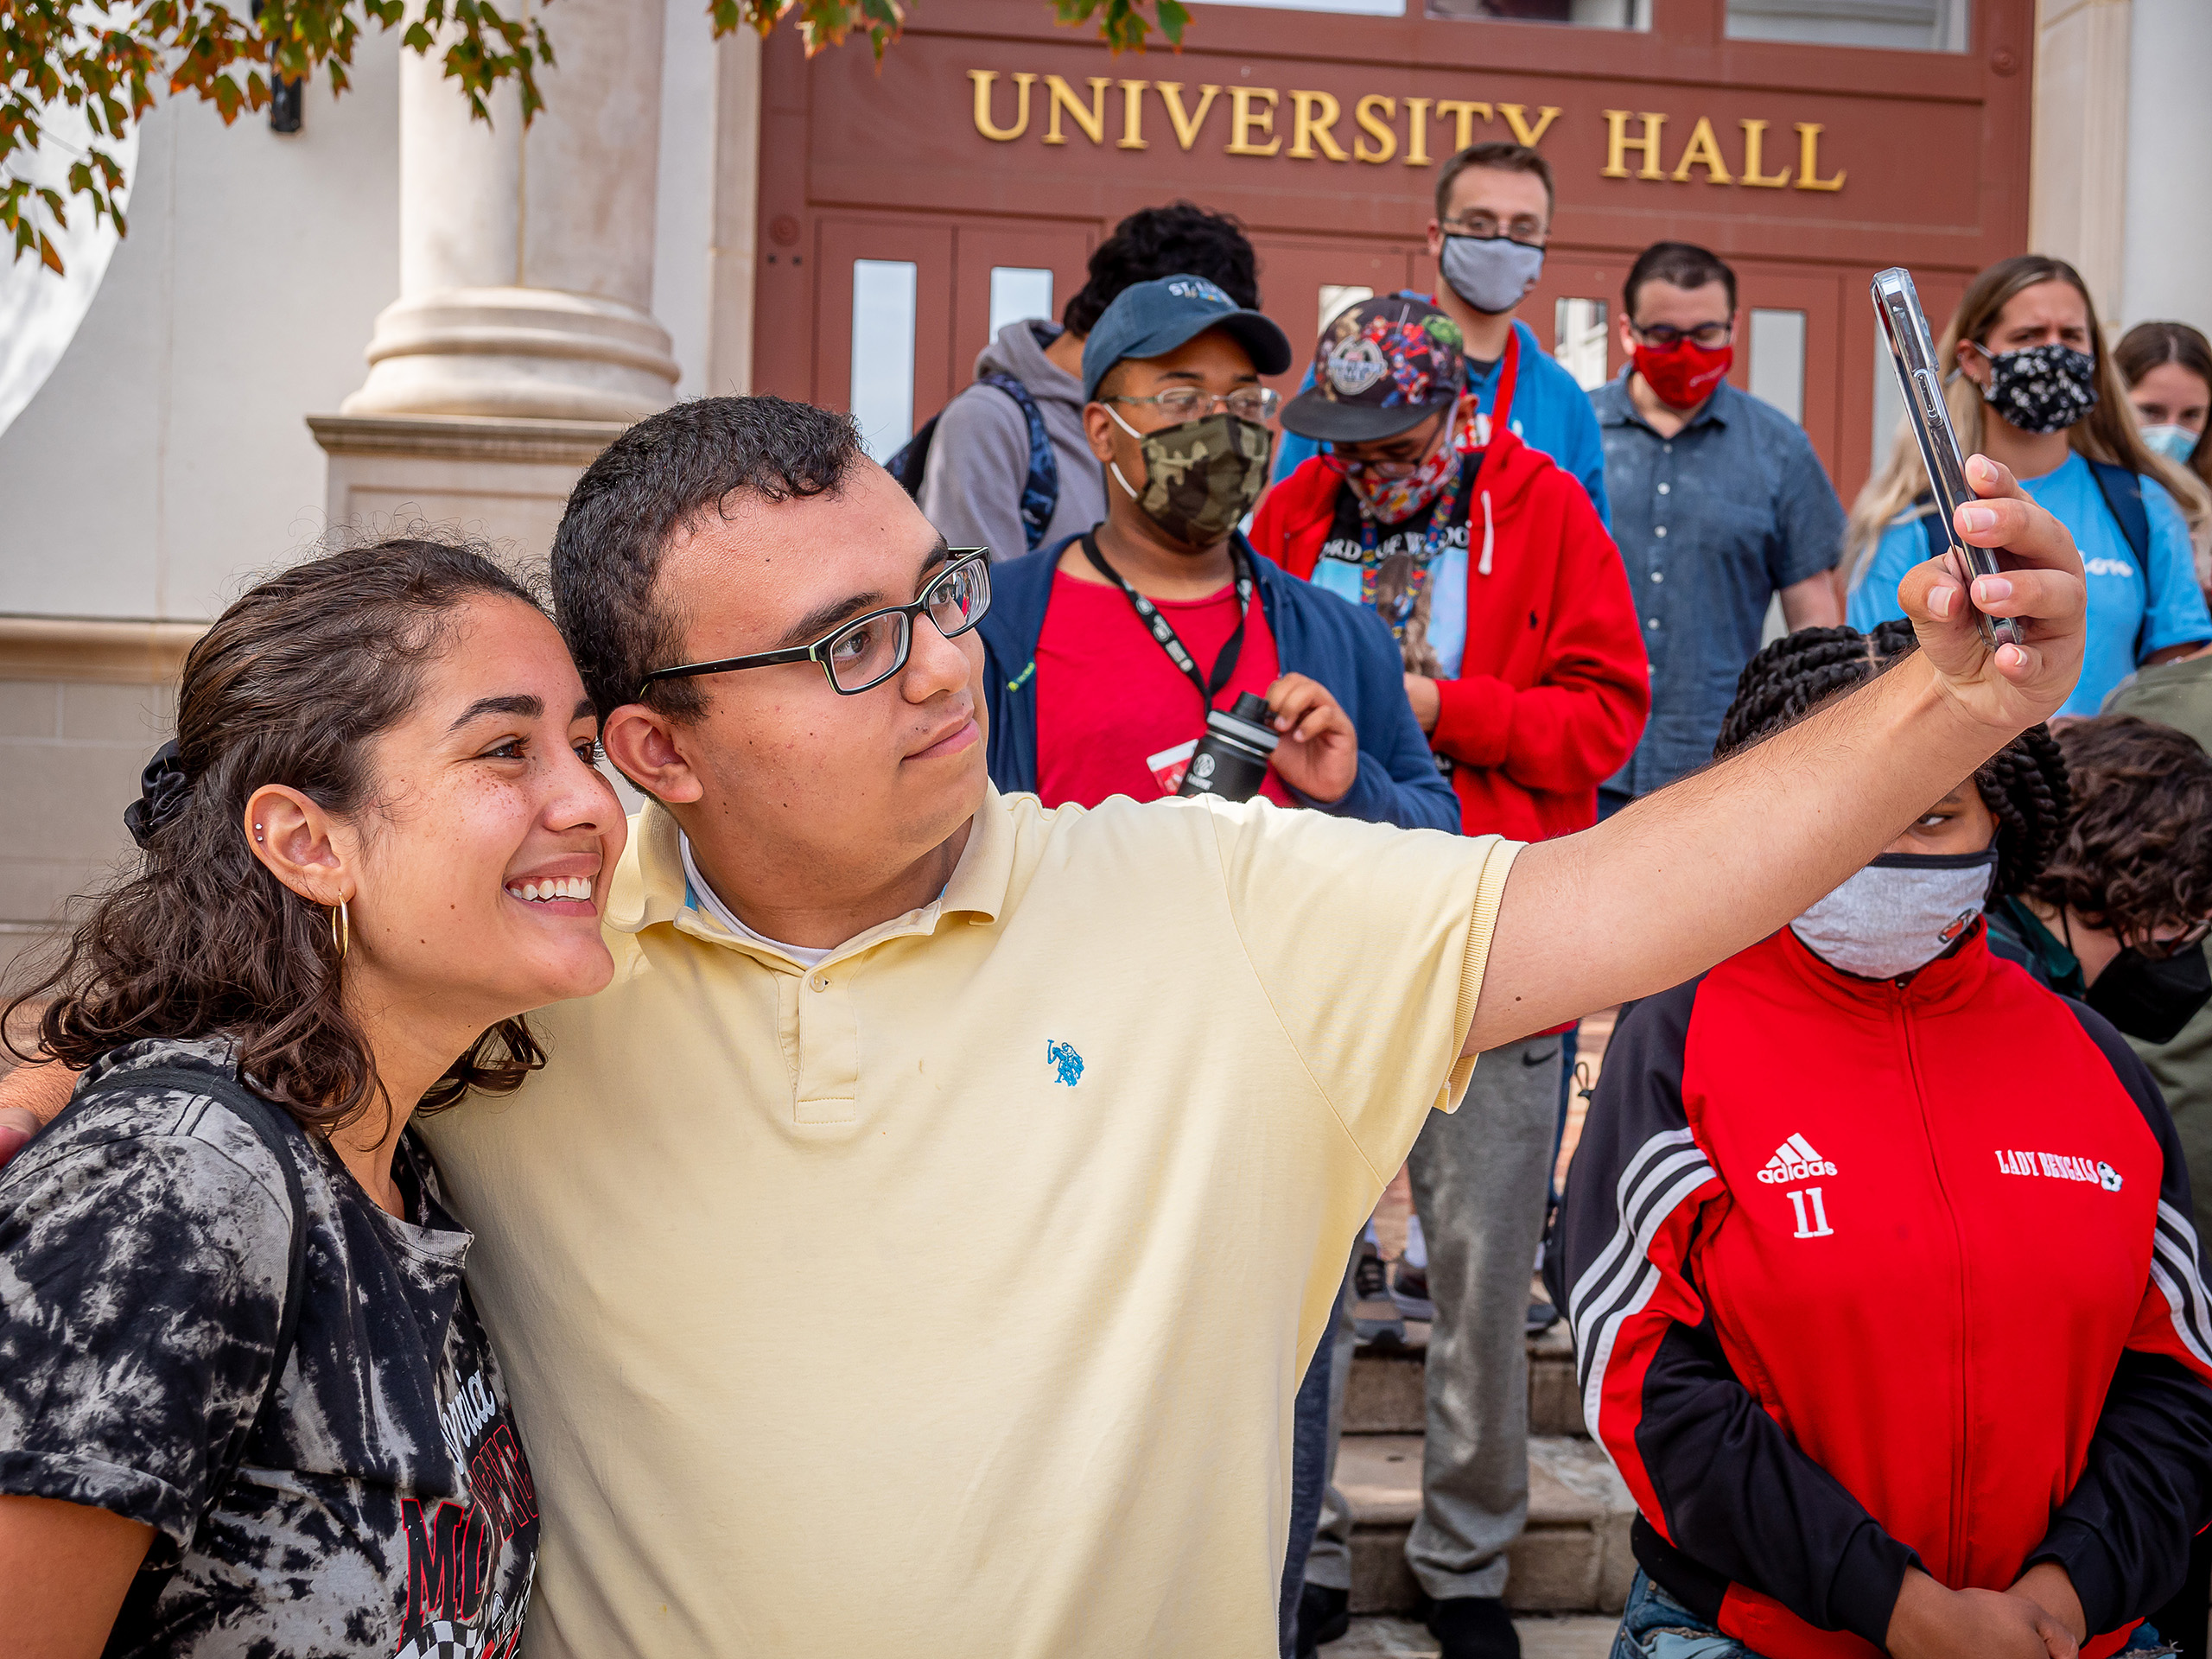 Two students pose for a selfie together with more students in the background